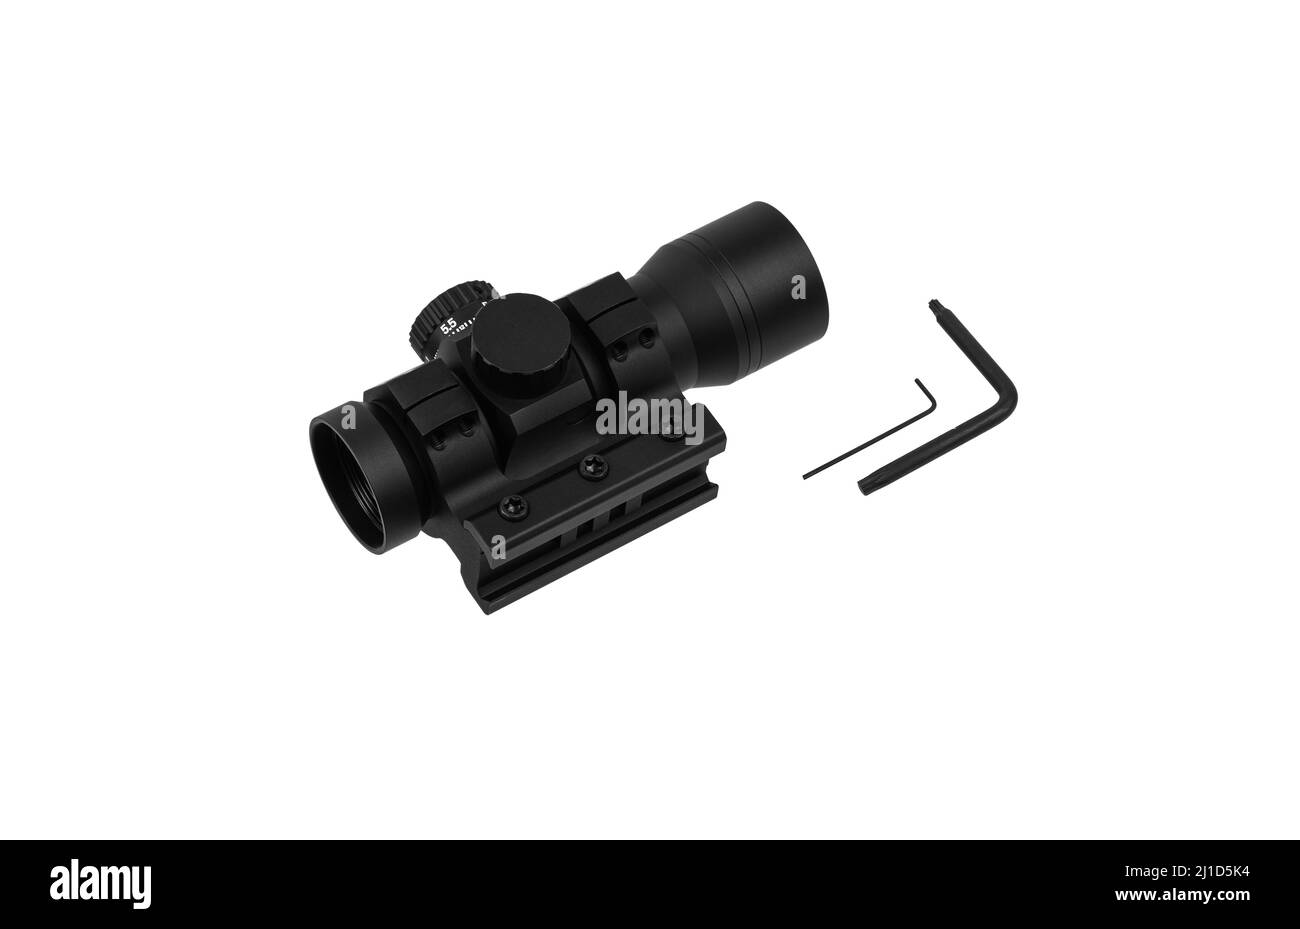 Modern optical collimator sight. Aiming device for shooting at short distances. Isolate on a white background. Stock Photo